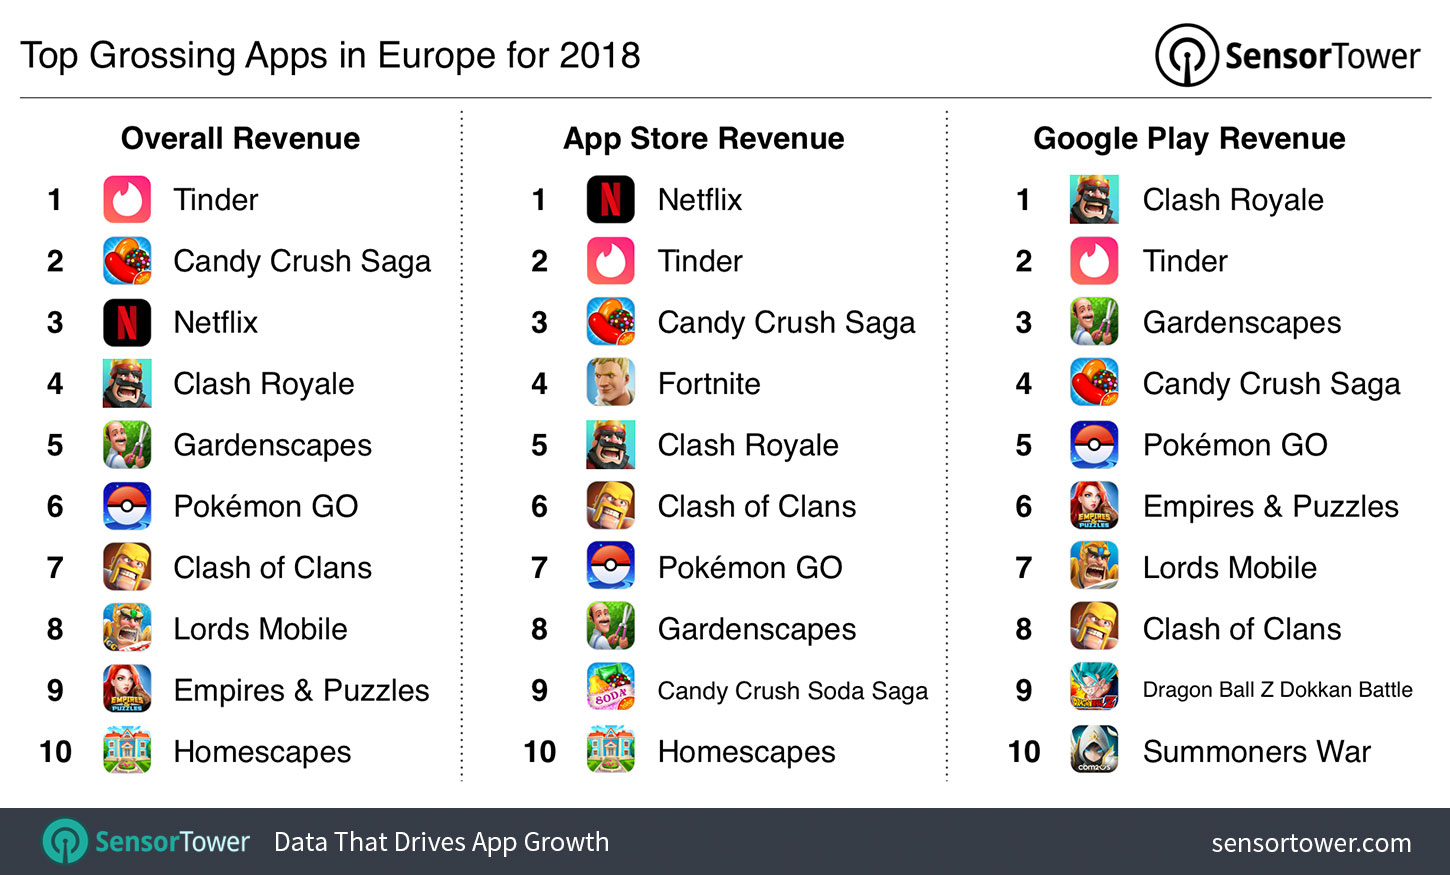 Top Grossing Apps in Europe for 2018